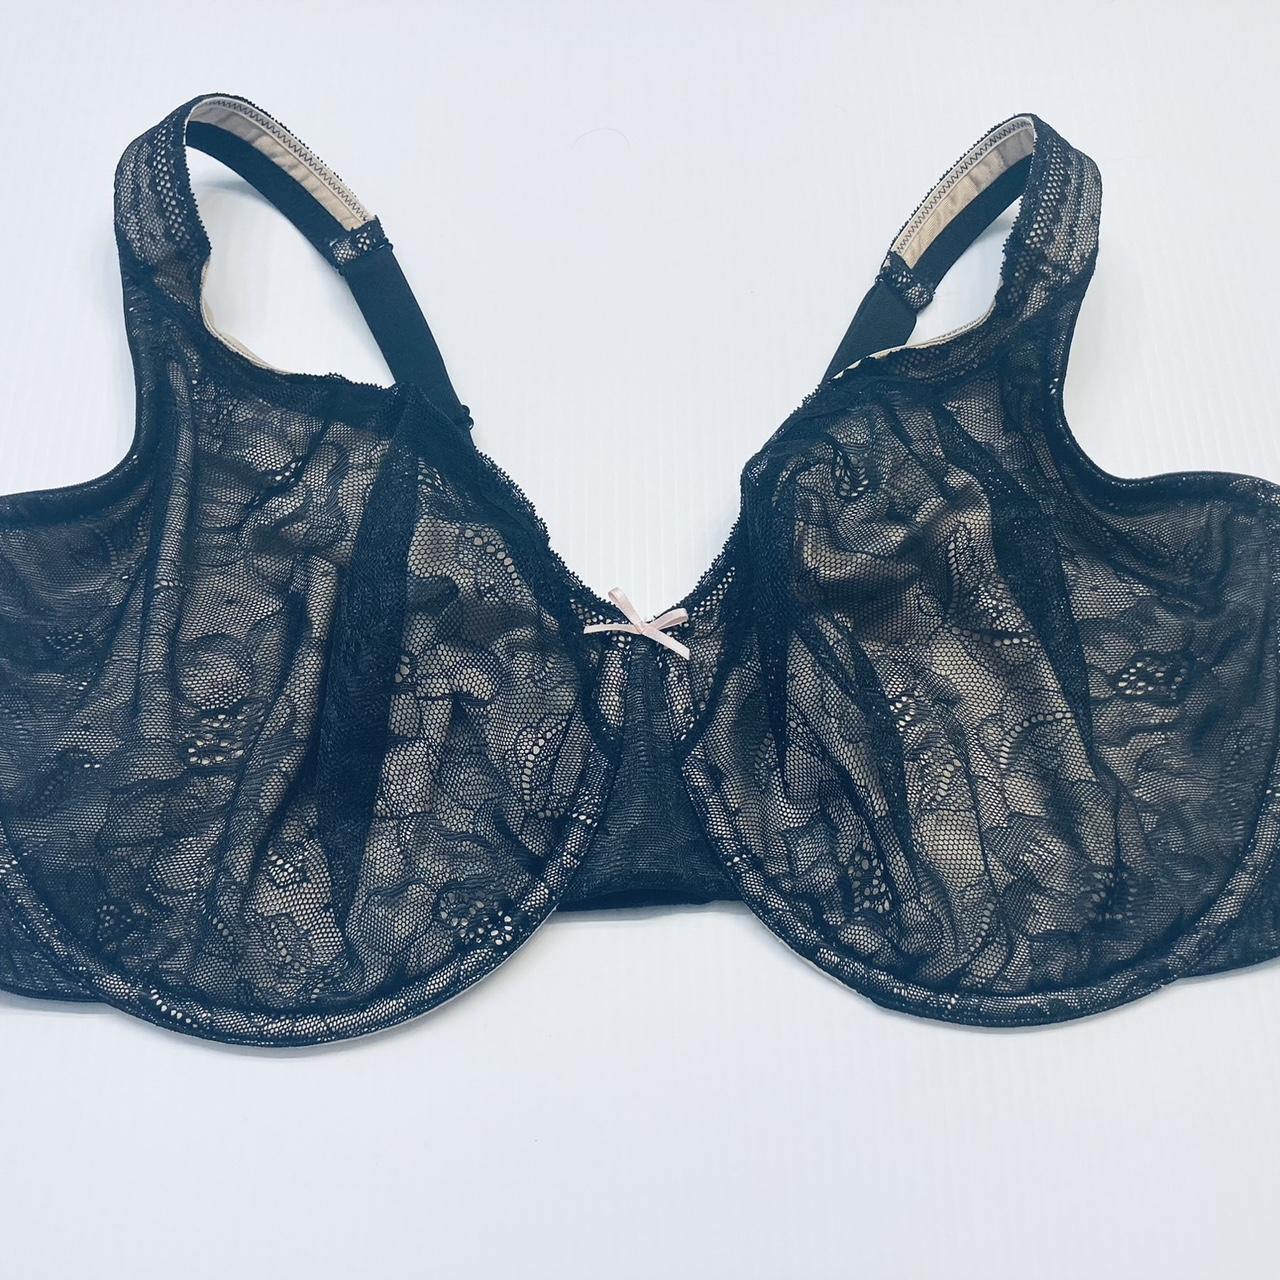 CACIQUE MODERN LACE Full Coverage Bra Unlined - Depop